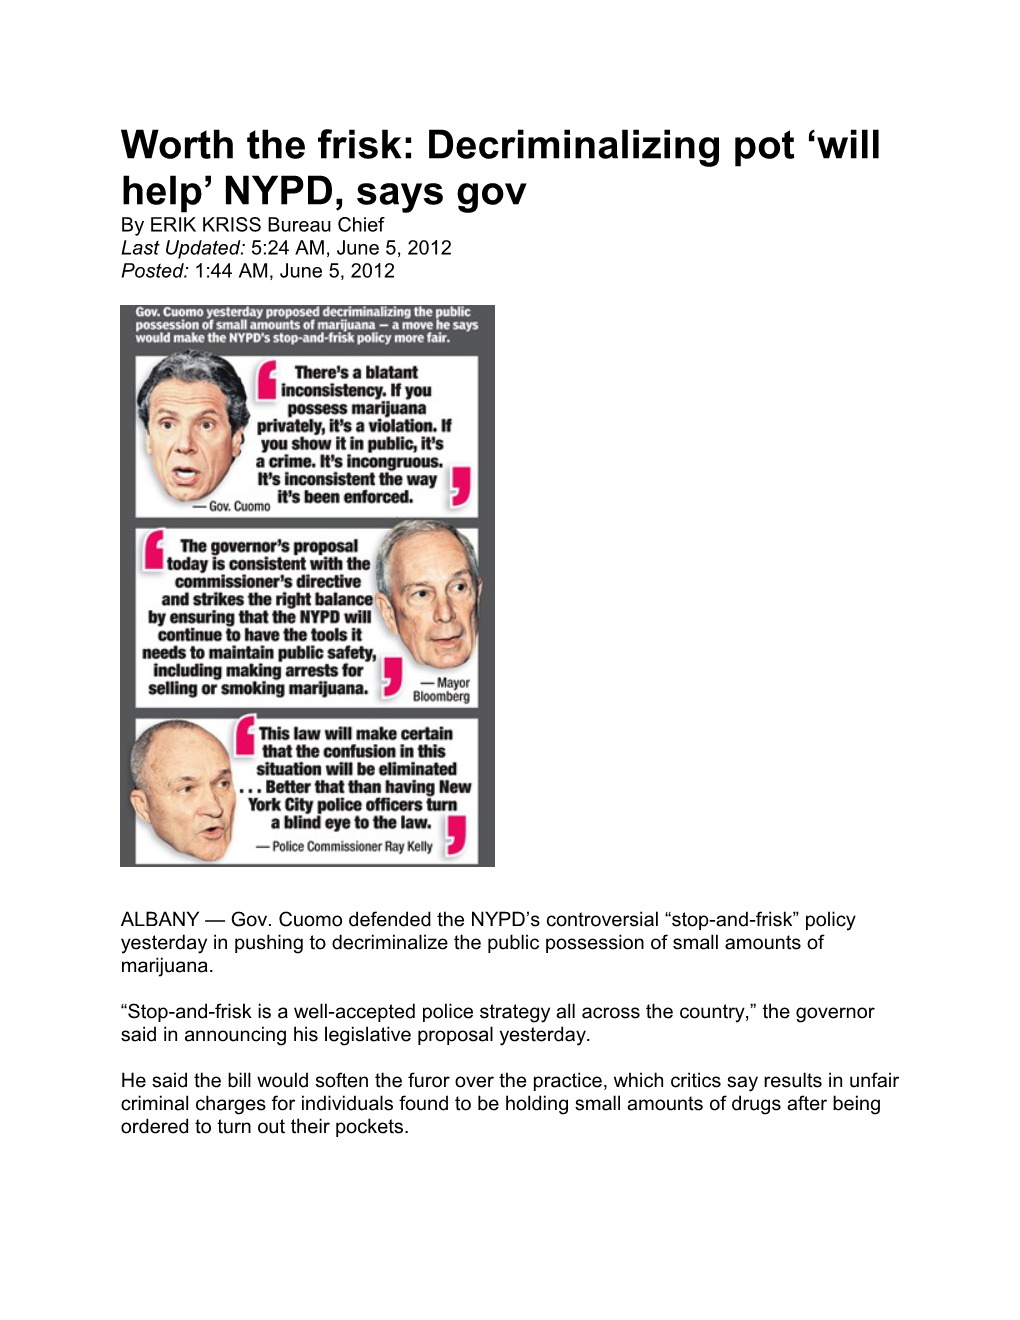 Worth the Frisk: Decriminalizing Pot Will Help NYPD, Says Gov